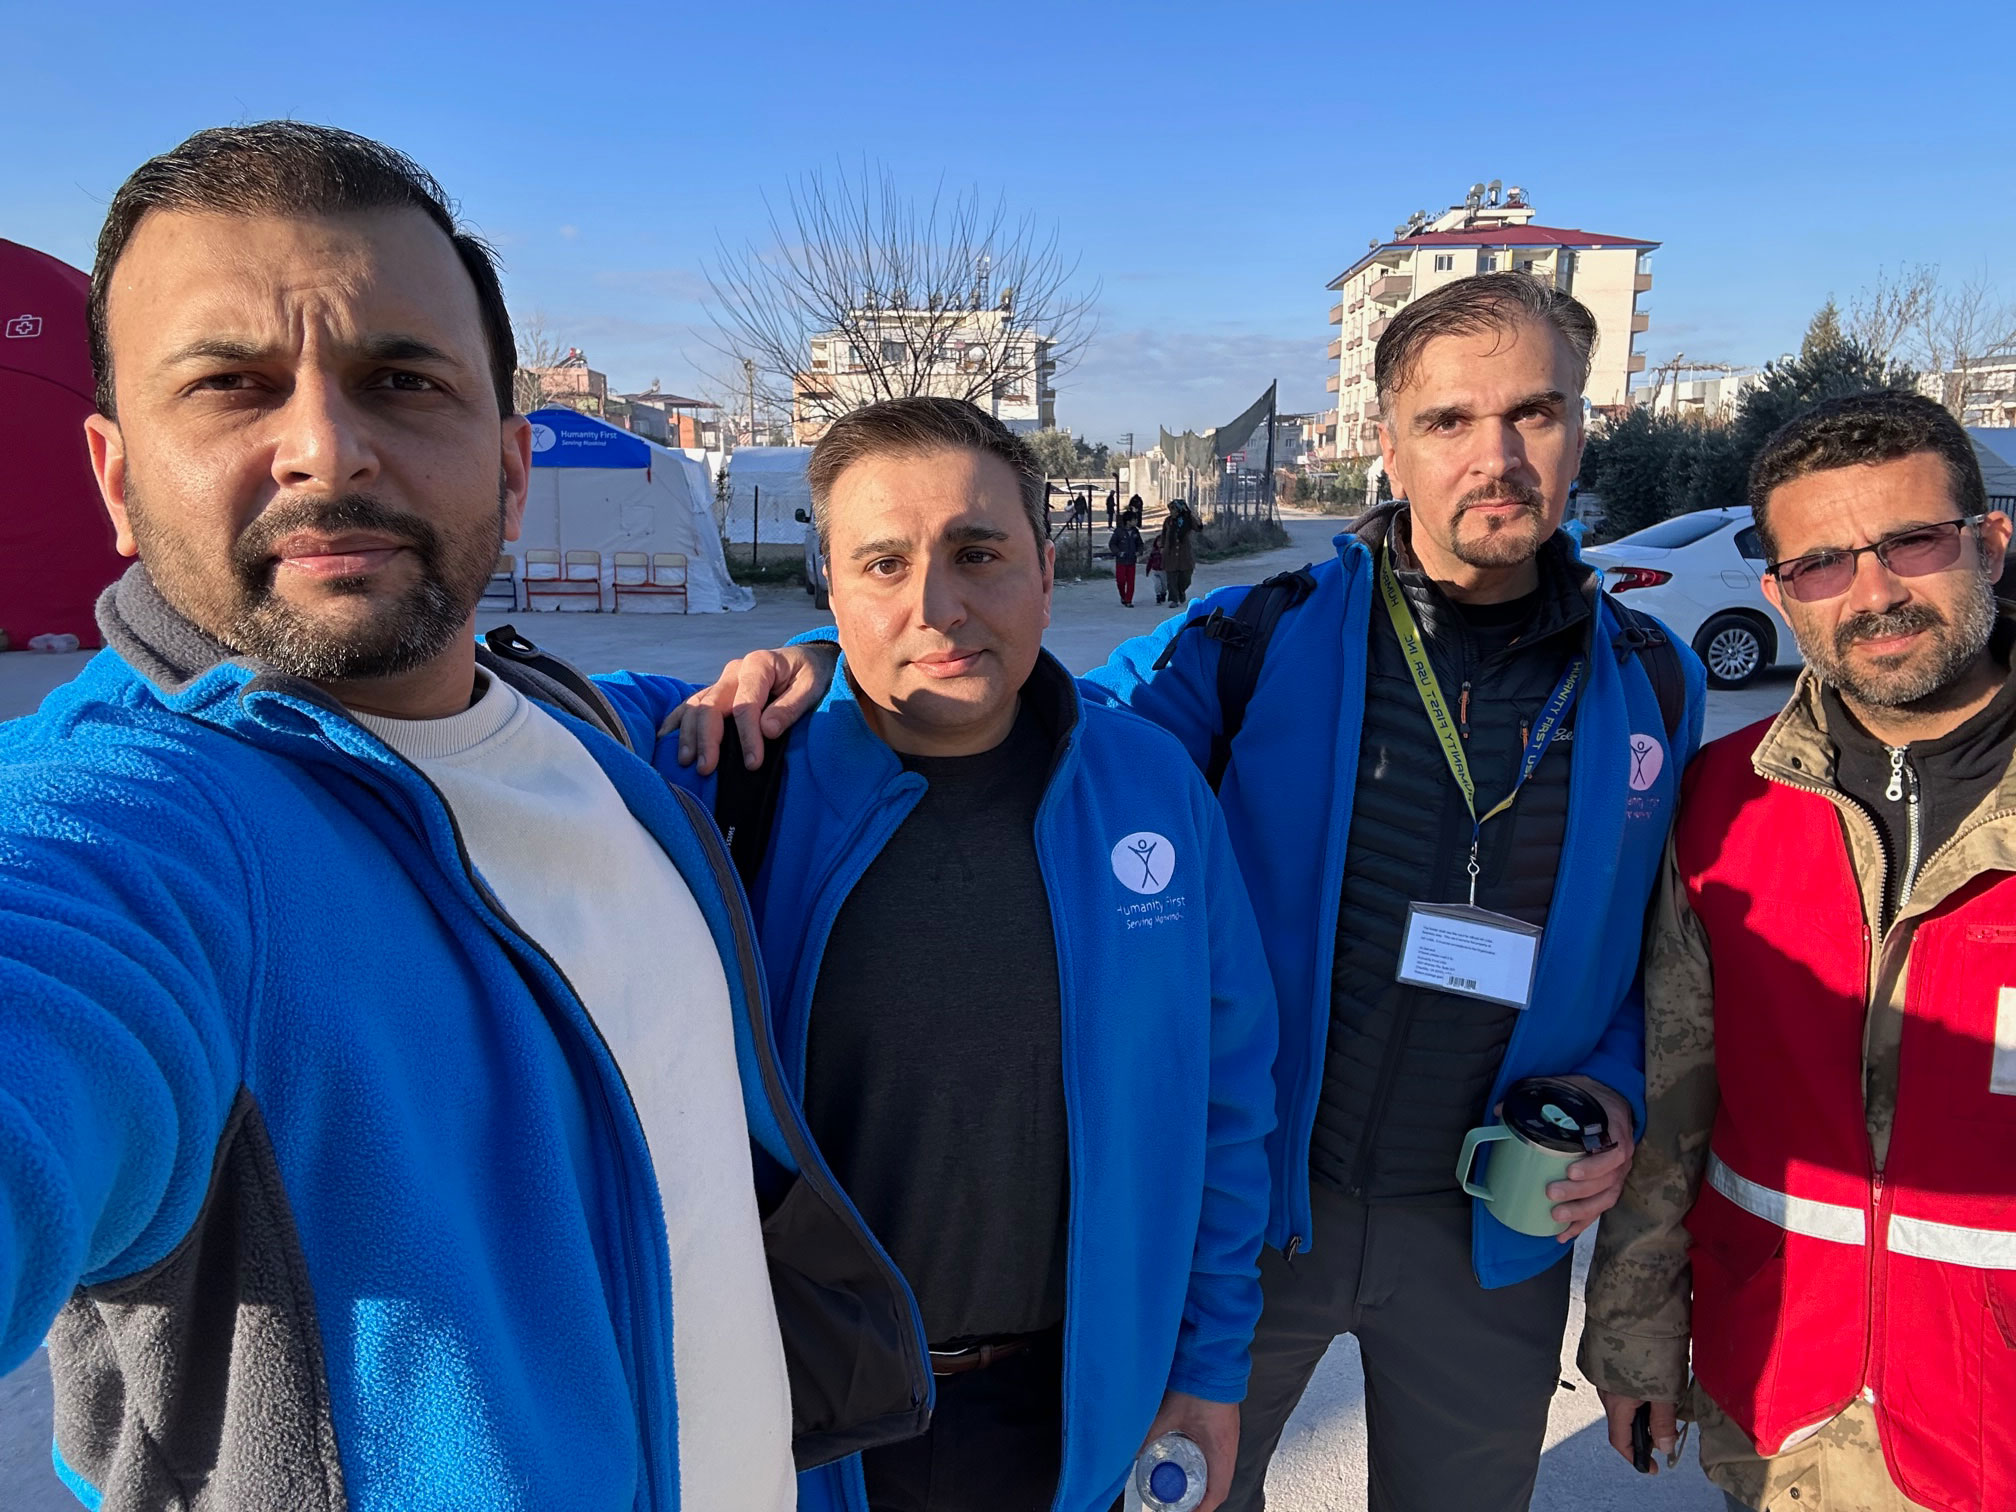 An Update and Reflection From Our Humanity First Mission in Turkey